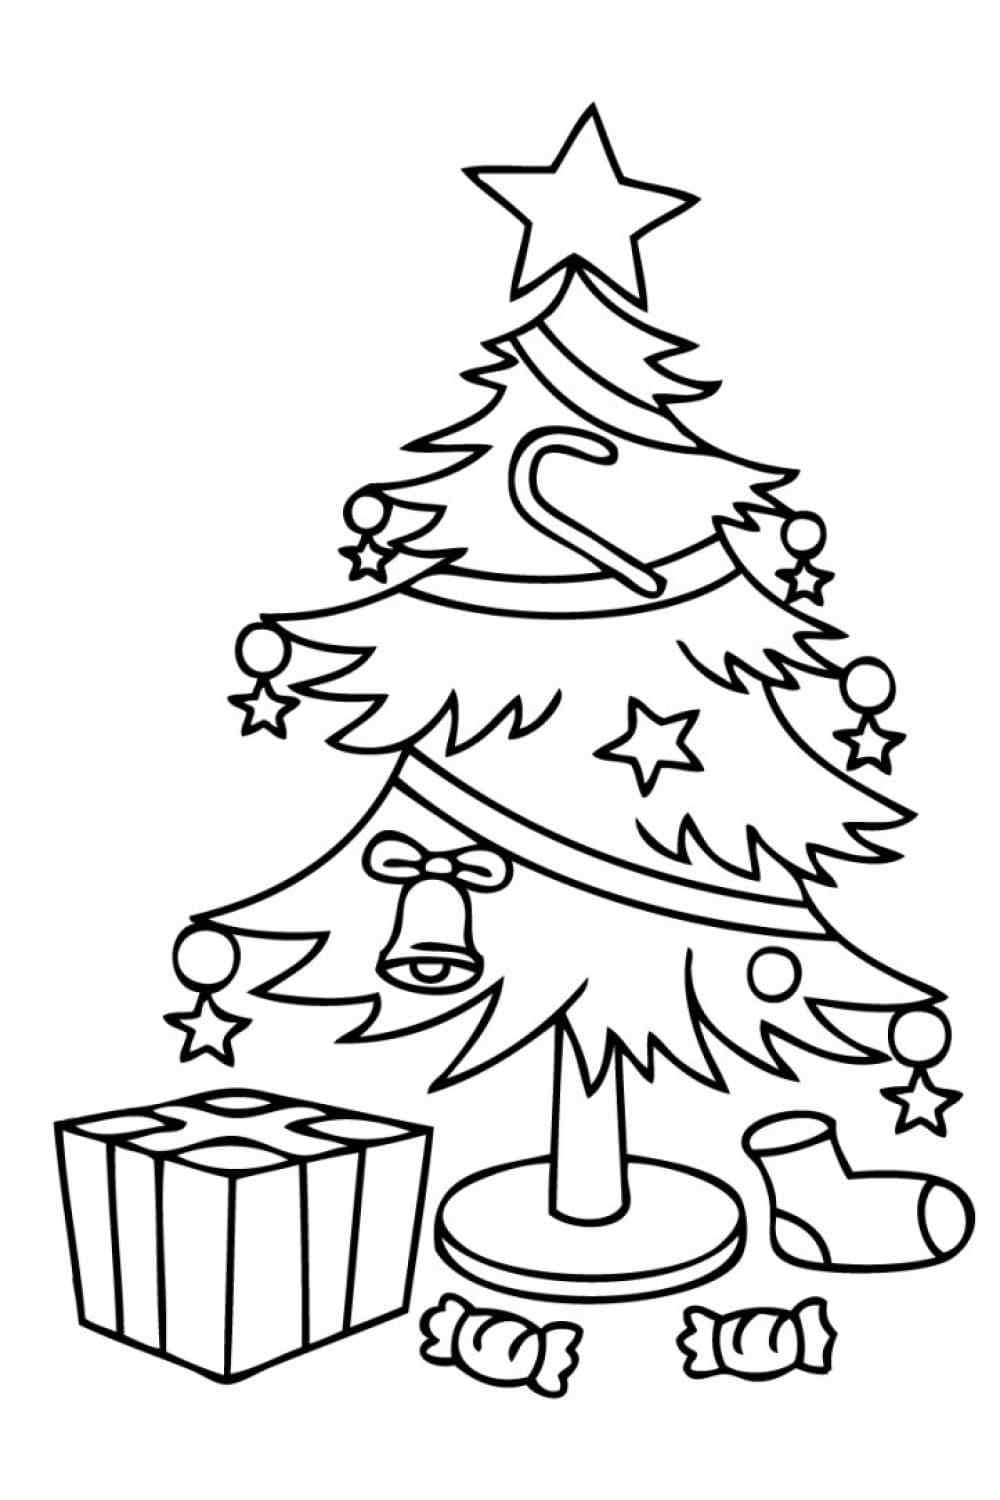 Wrapped In A Garland Coloring Page